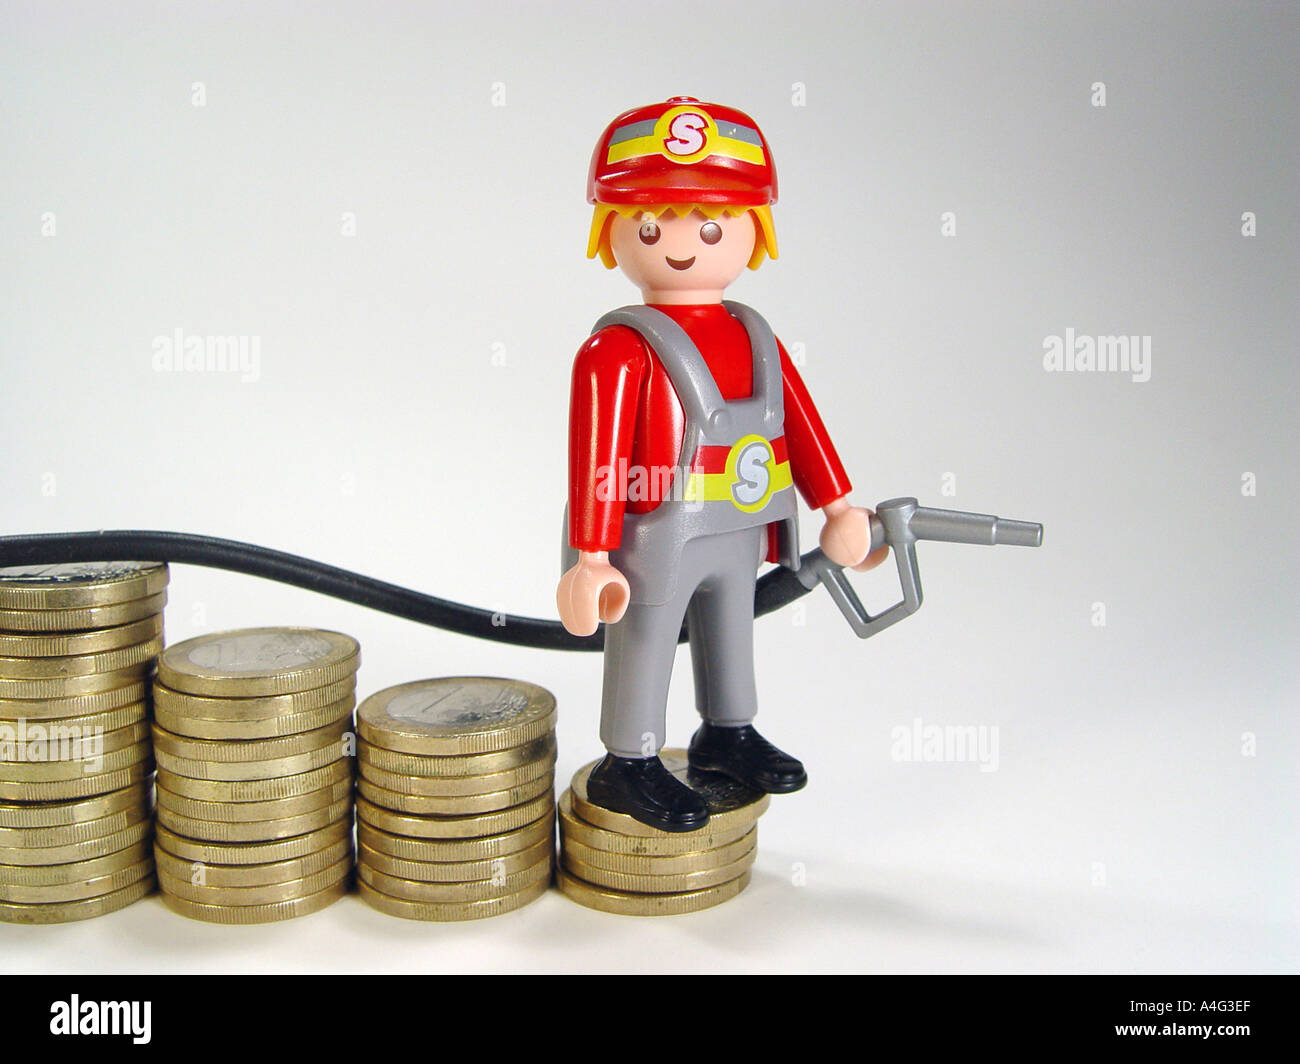 Service station attendant on a pile euro coins as symbol for the sinking fuel prices Stock Photo